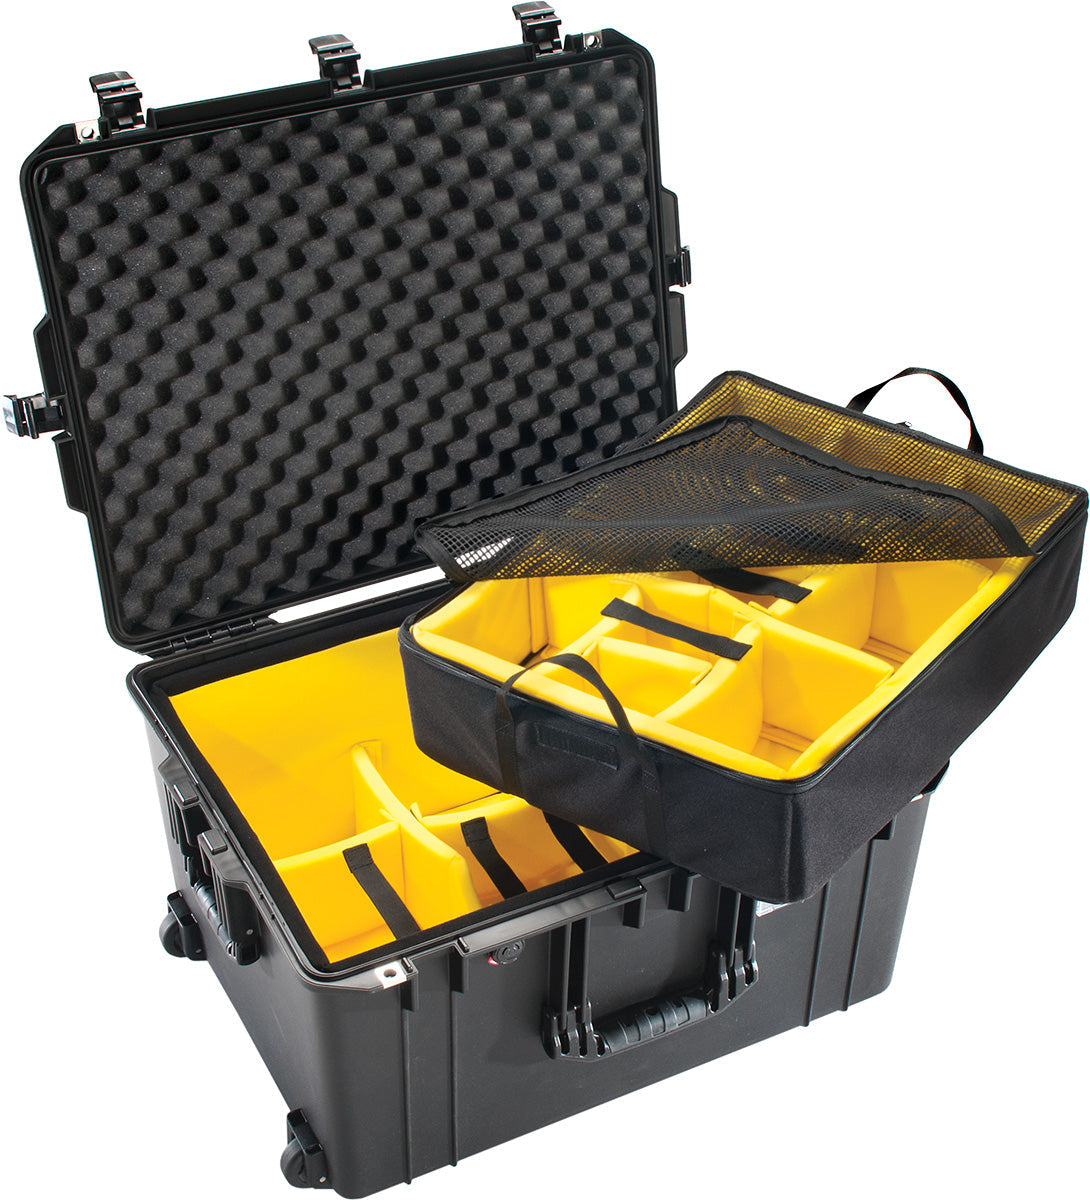 Pelican Air 1637 Lightweight Watertight Wheeled Check-In Case